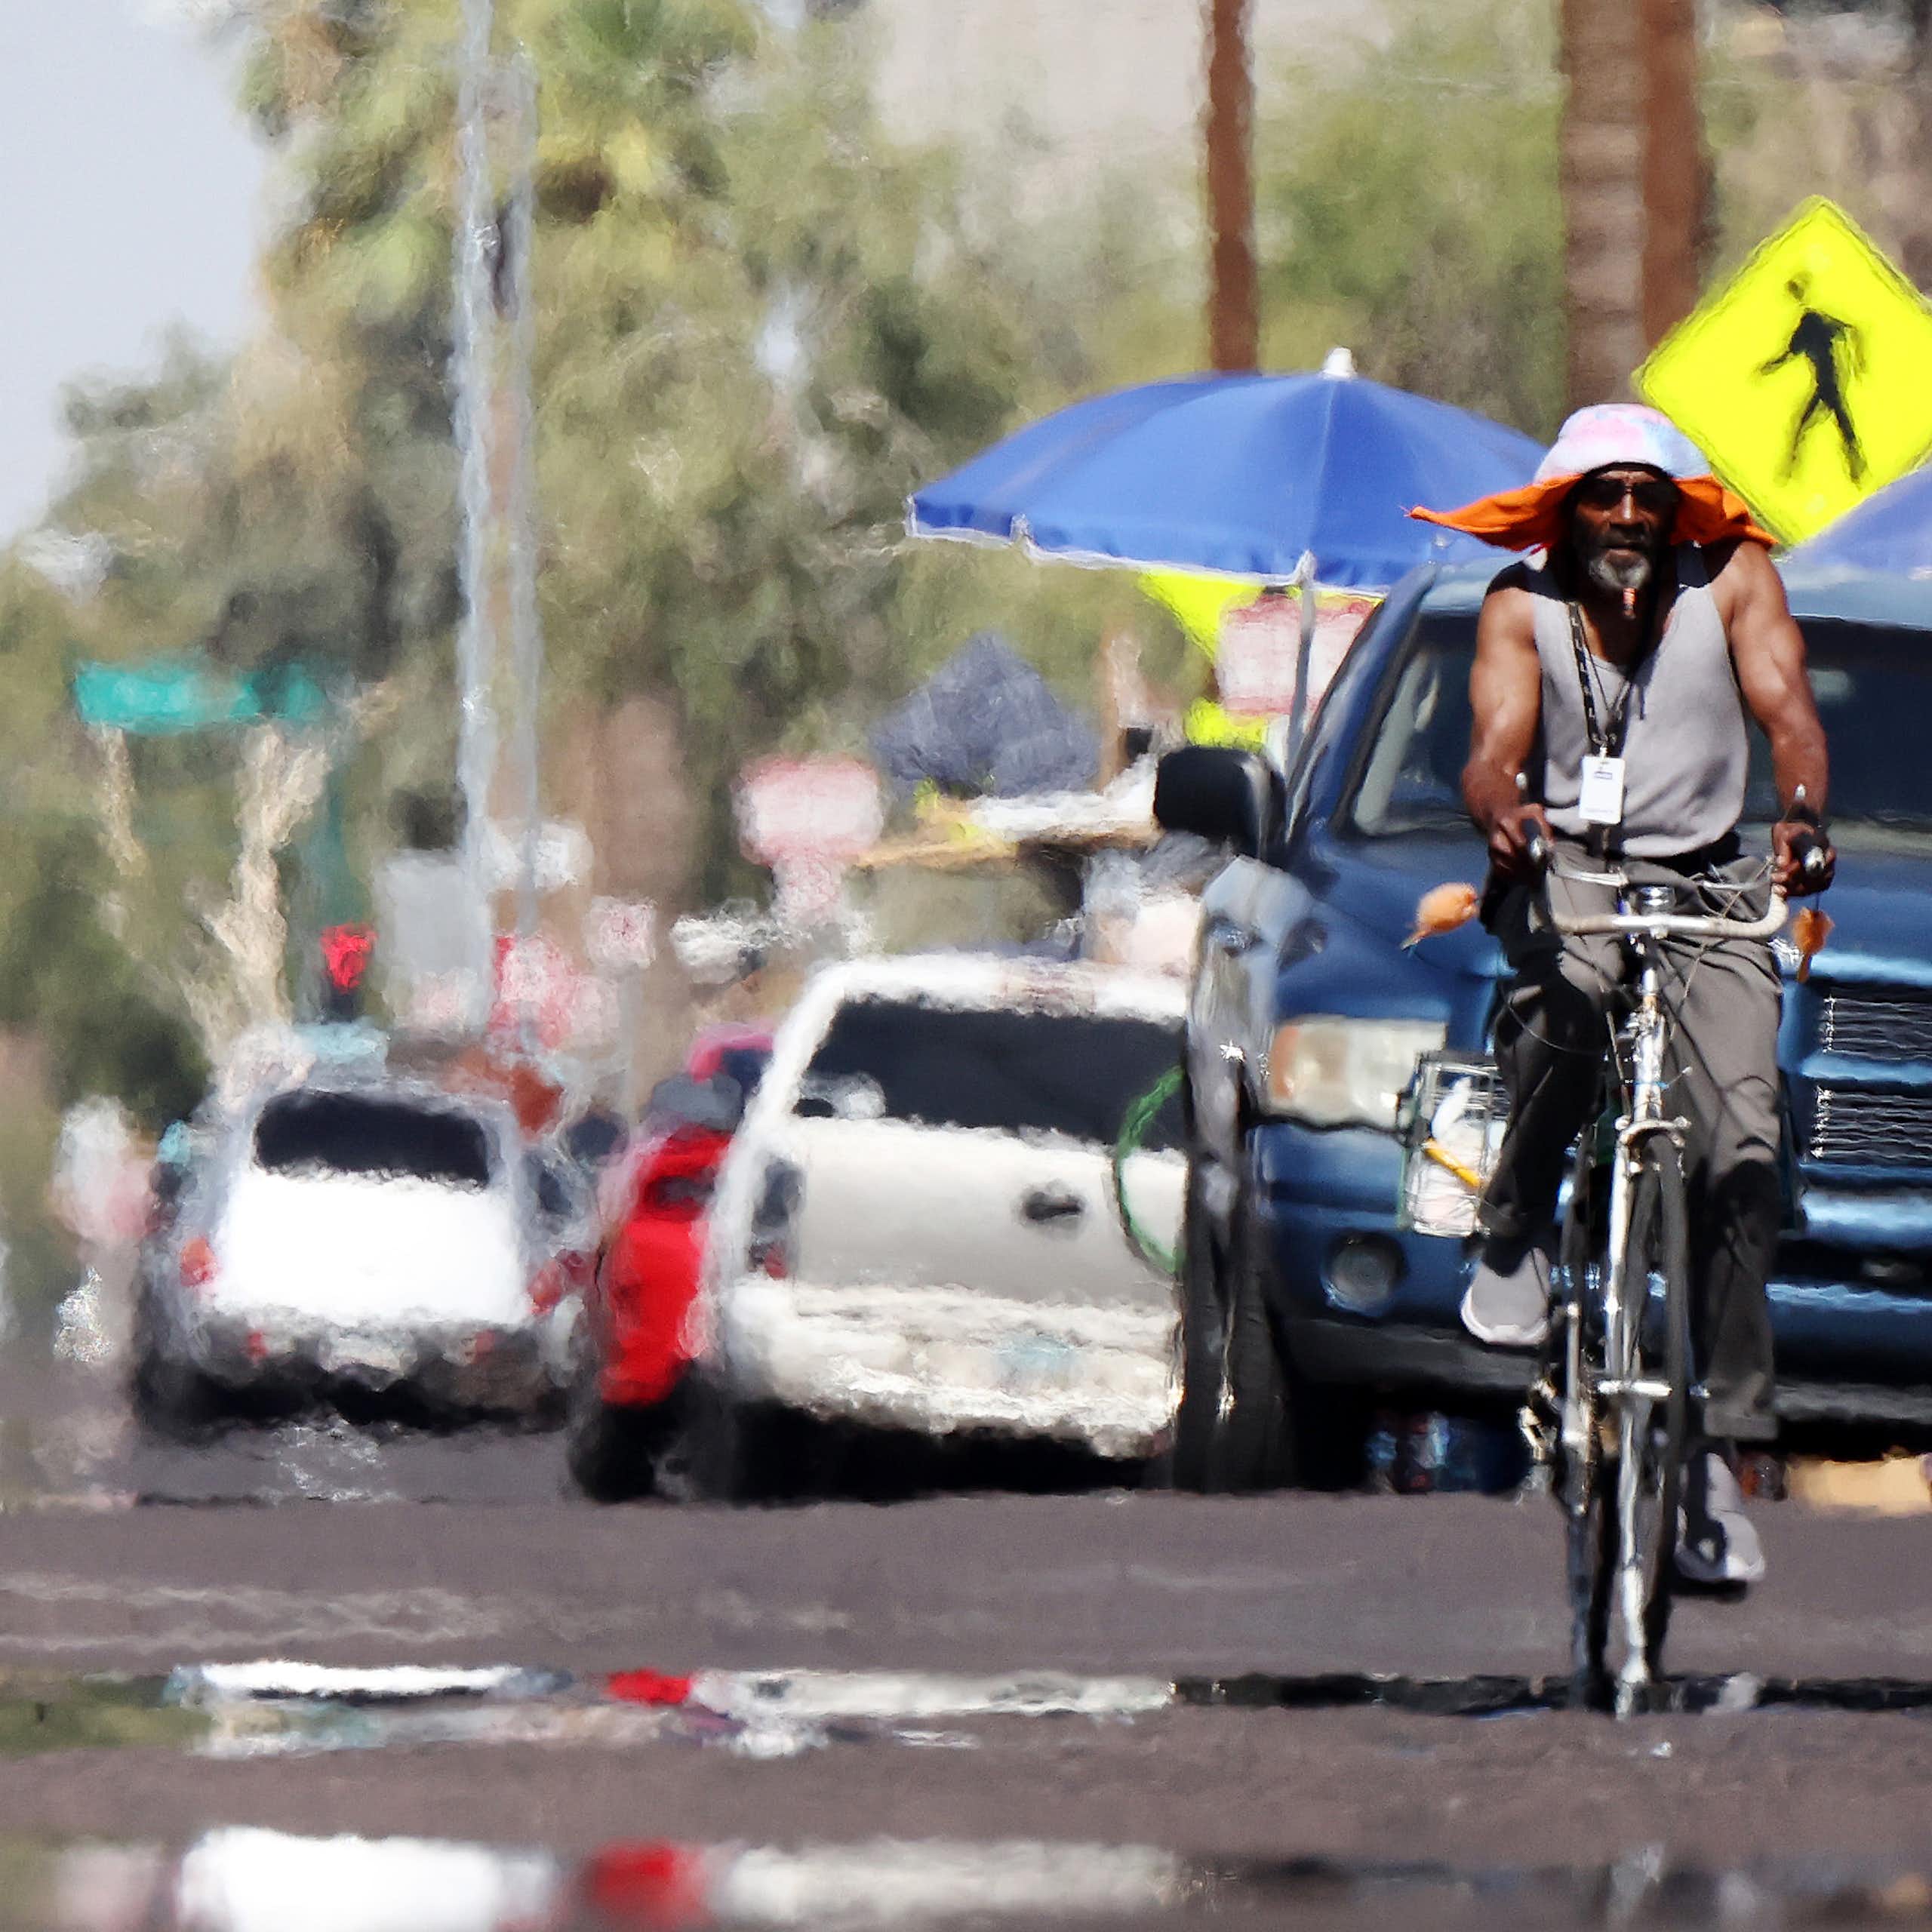 A man with a large hat rides a bike a on street with heat rising, creating a wavy view.